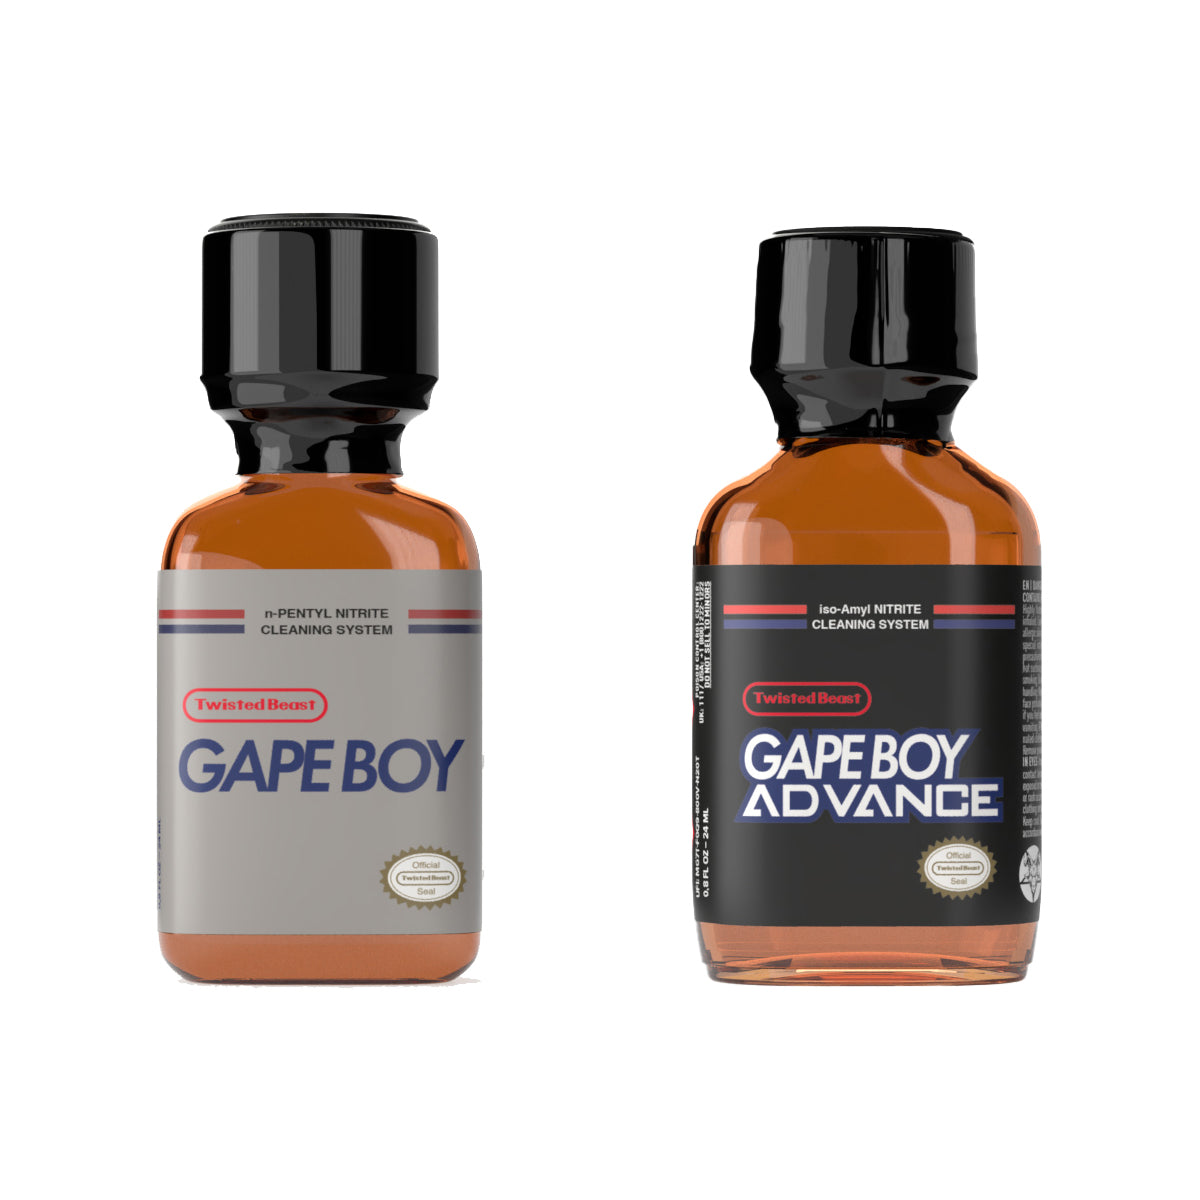 The Gape Boy Double Poppers Back, which includes a bottle of Gape Boy Poppers and Gape Boy Advance Poppers.